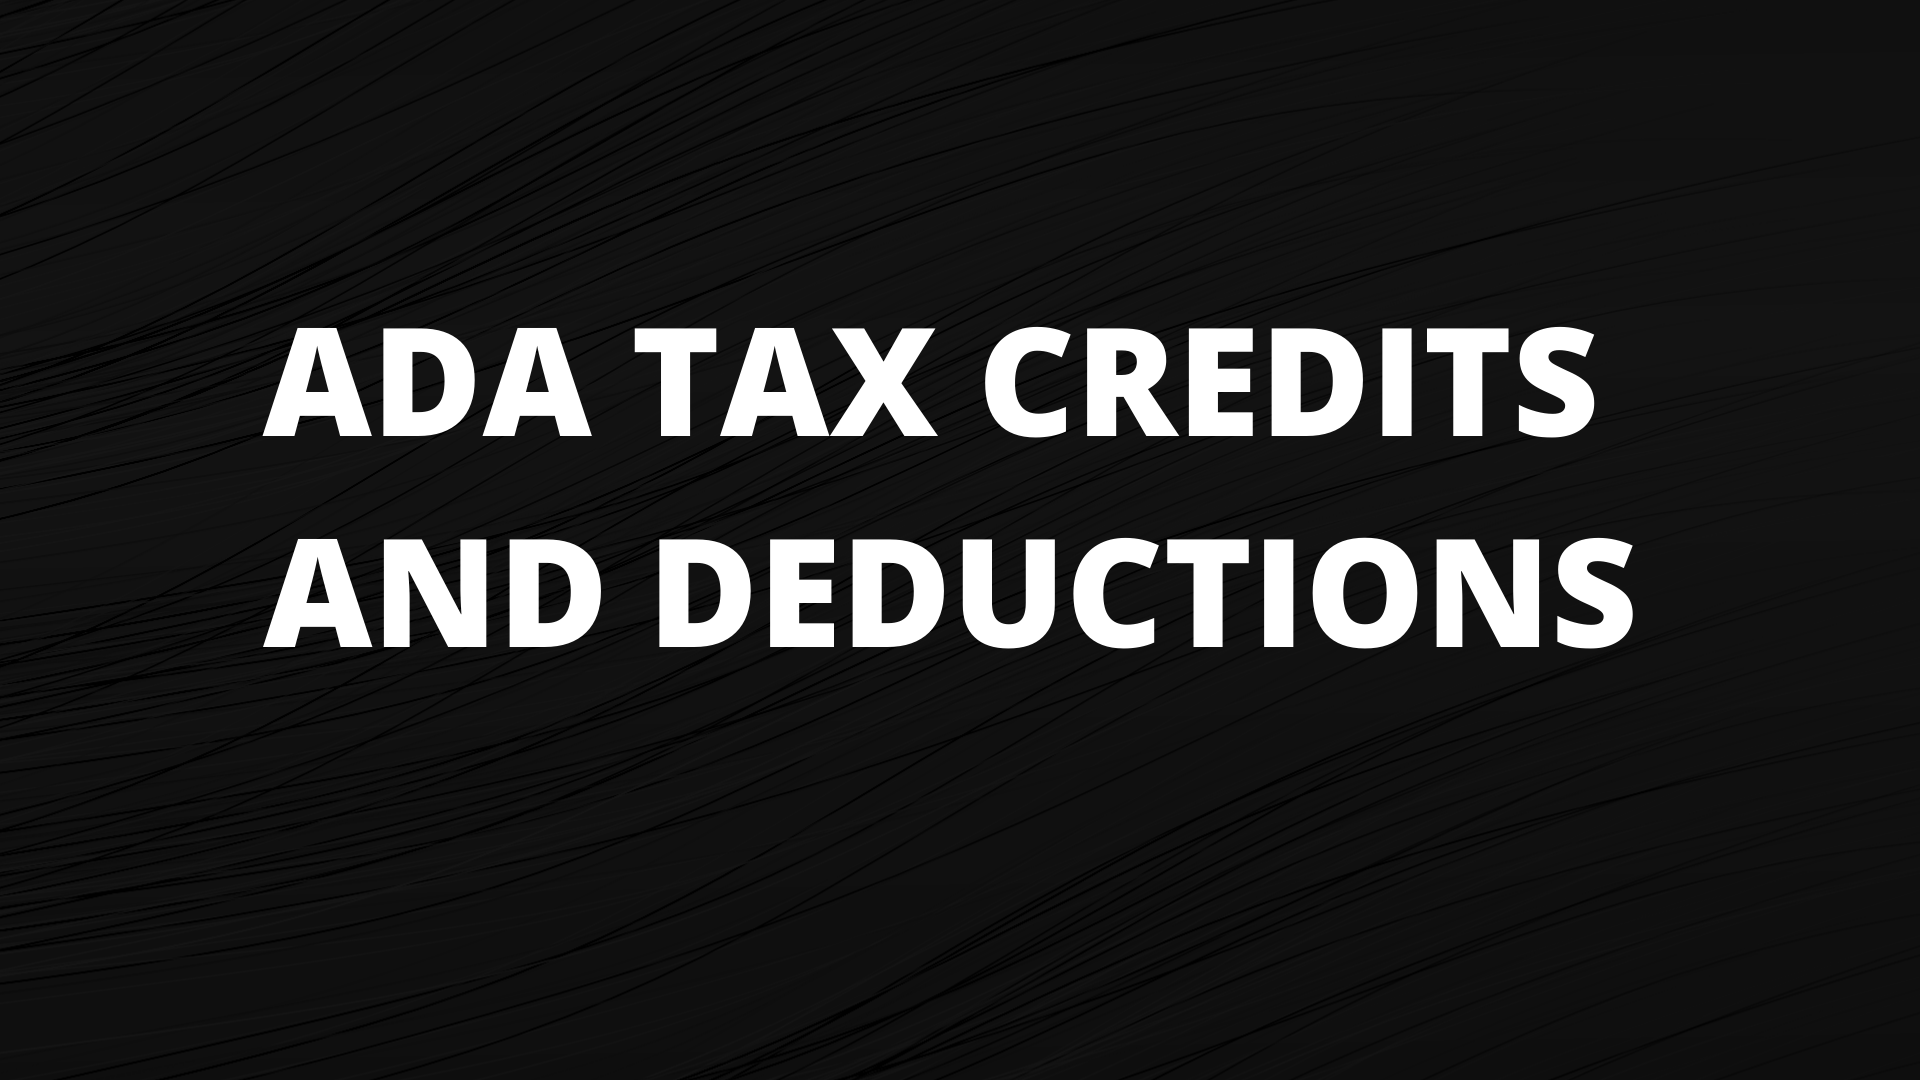 IRS Tax Credits And Deductions ADA WCAG LAW COMPLIANCE